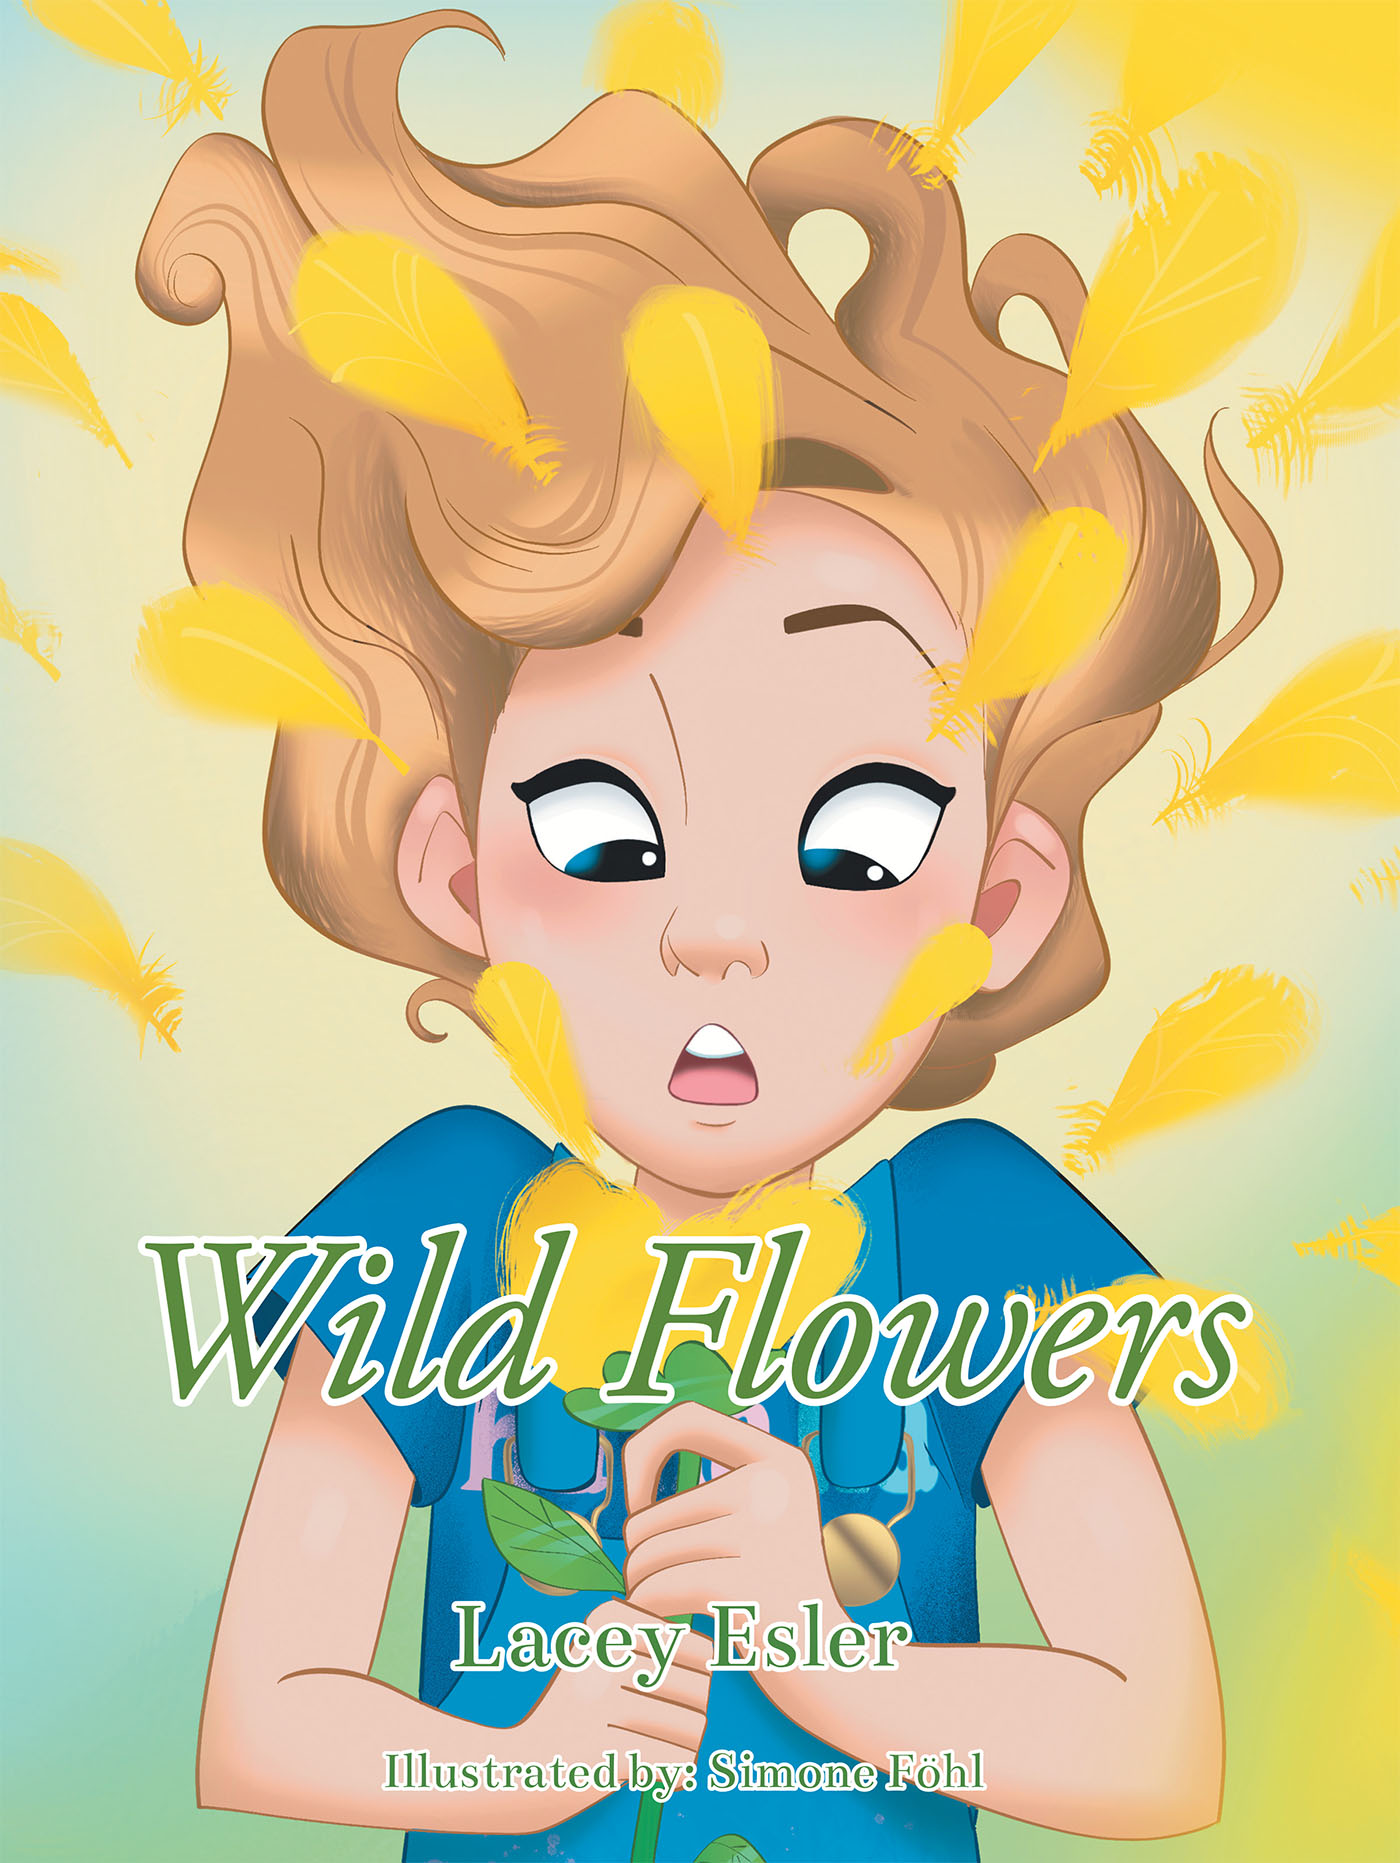 Wild Flowers Cover Image